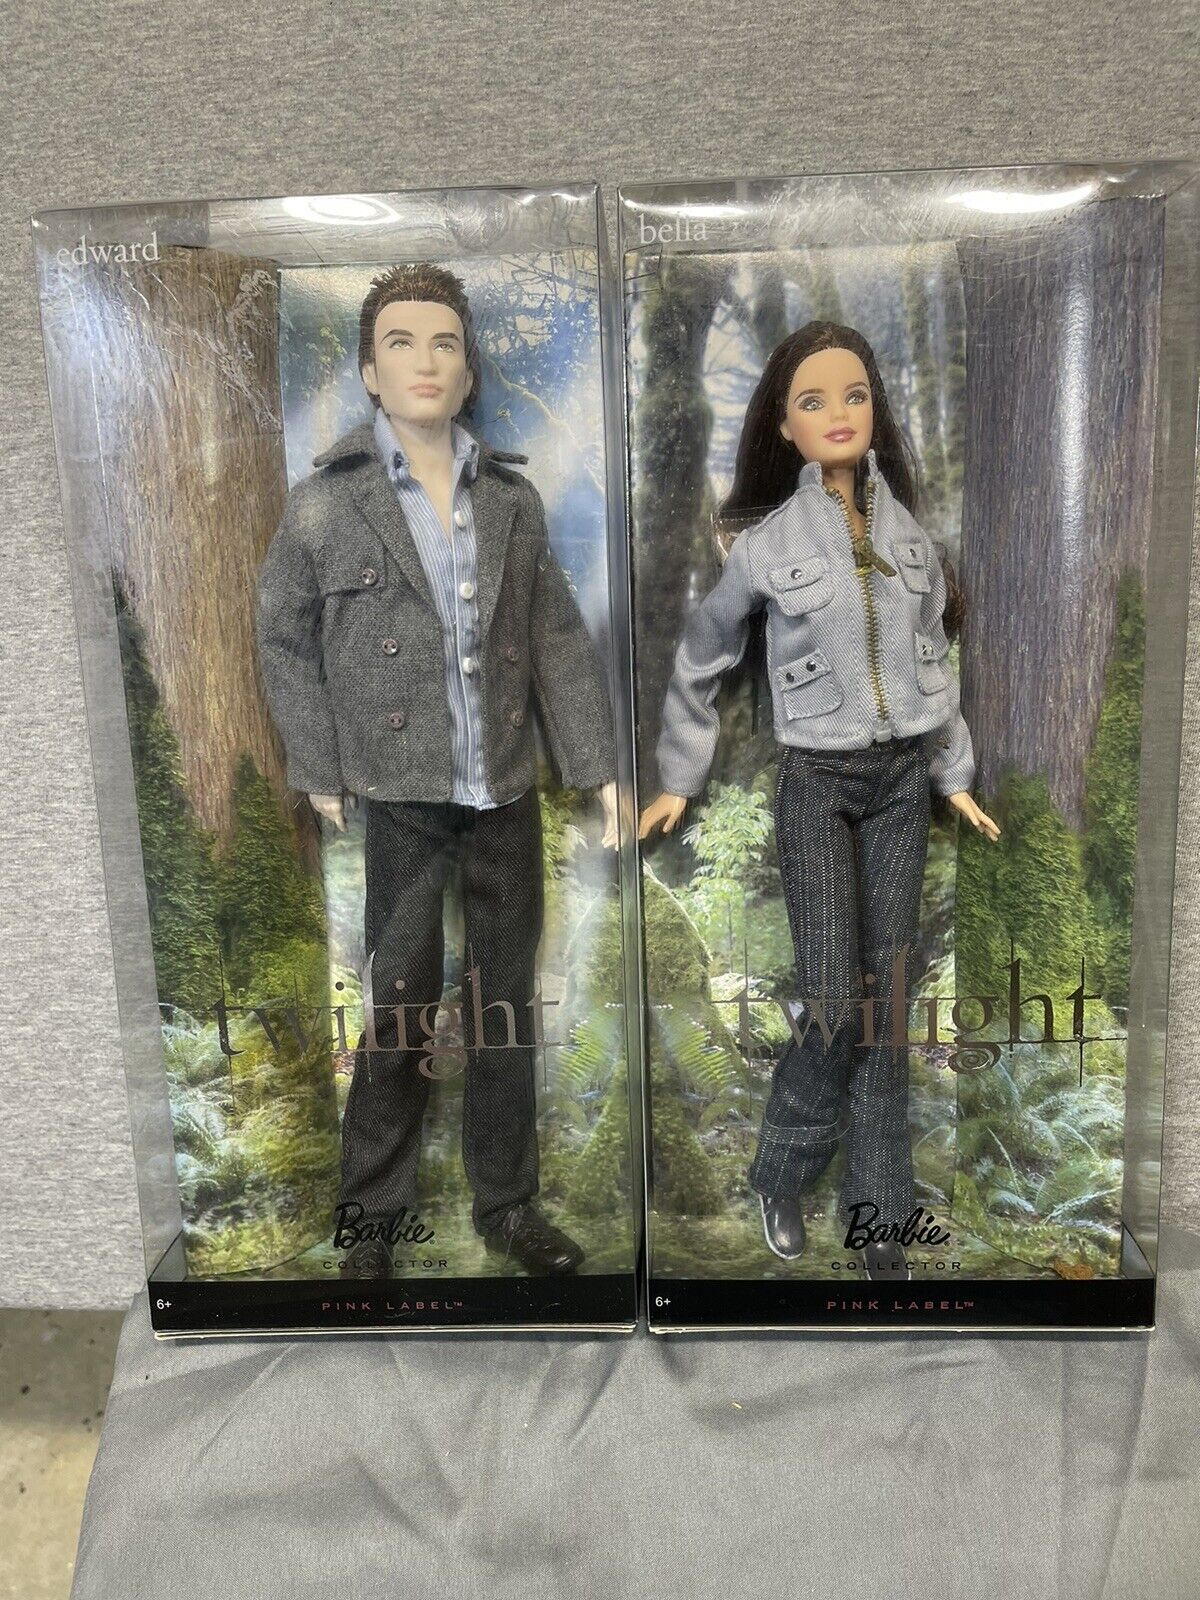 Twilight Dolls Bella And Edward By Barbie New In Box Pink Label Edition